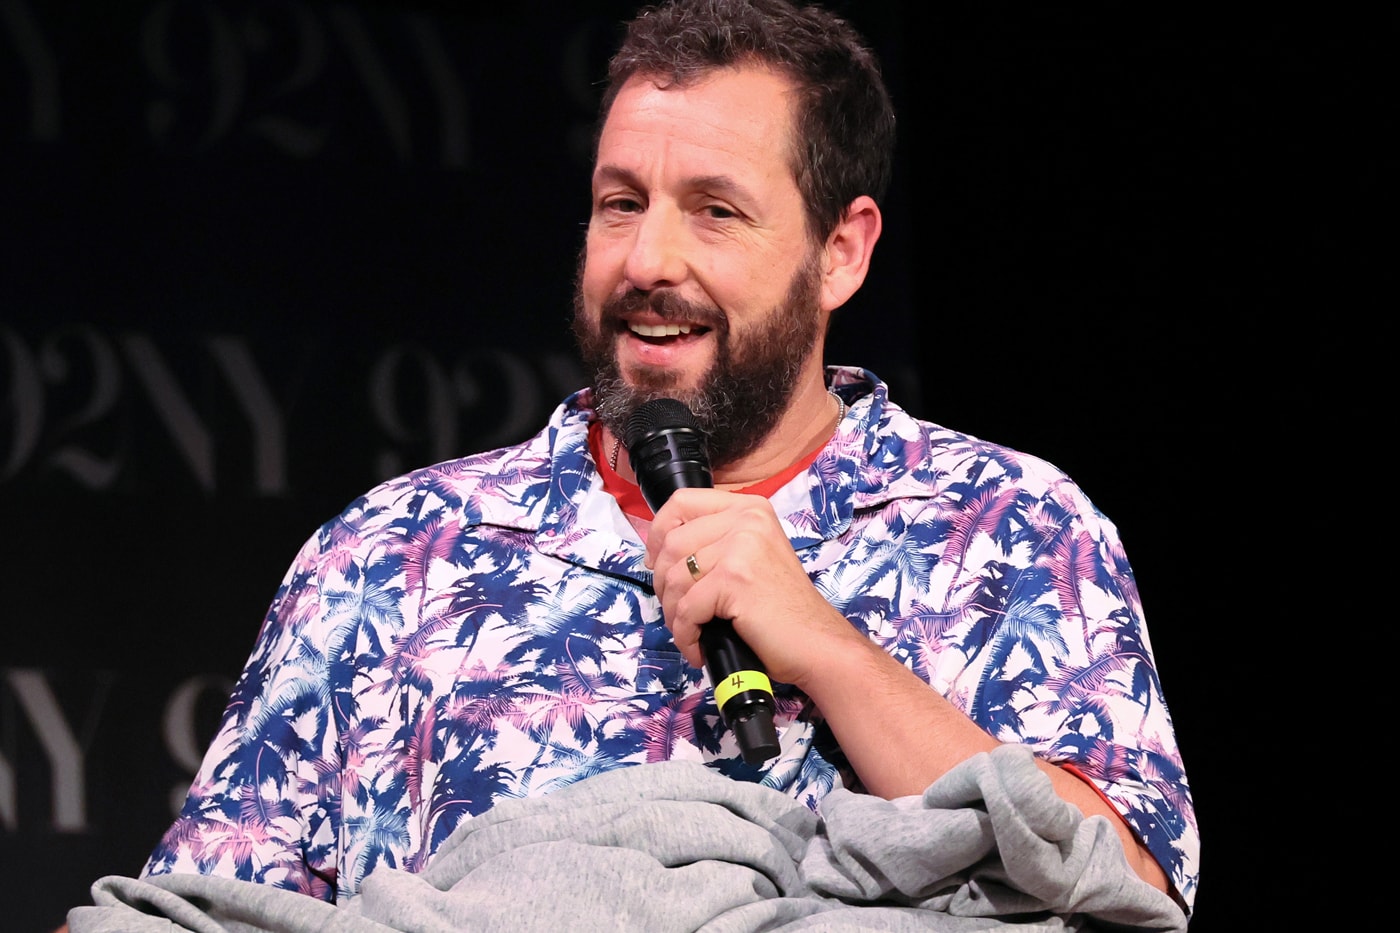 who is on tour with adam sandler